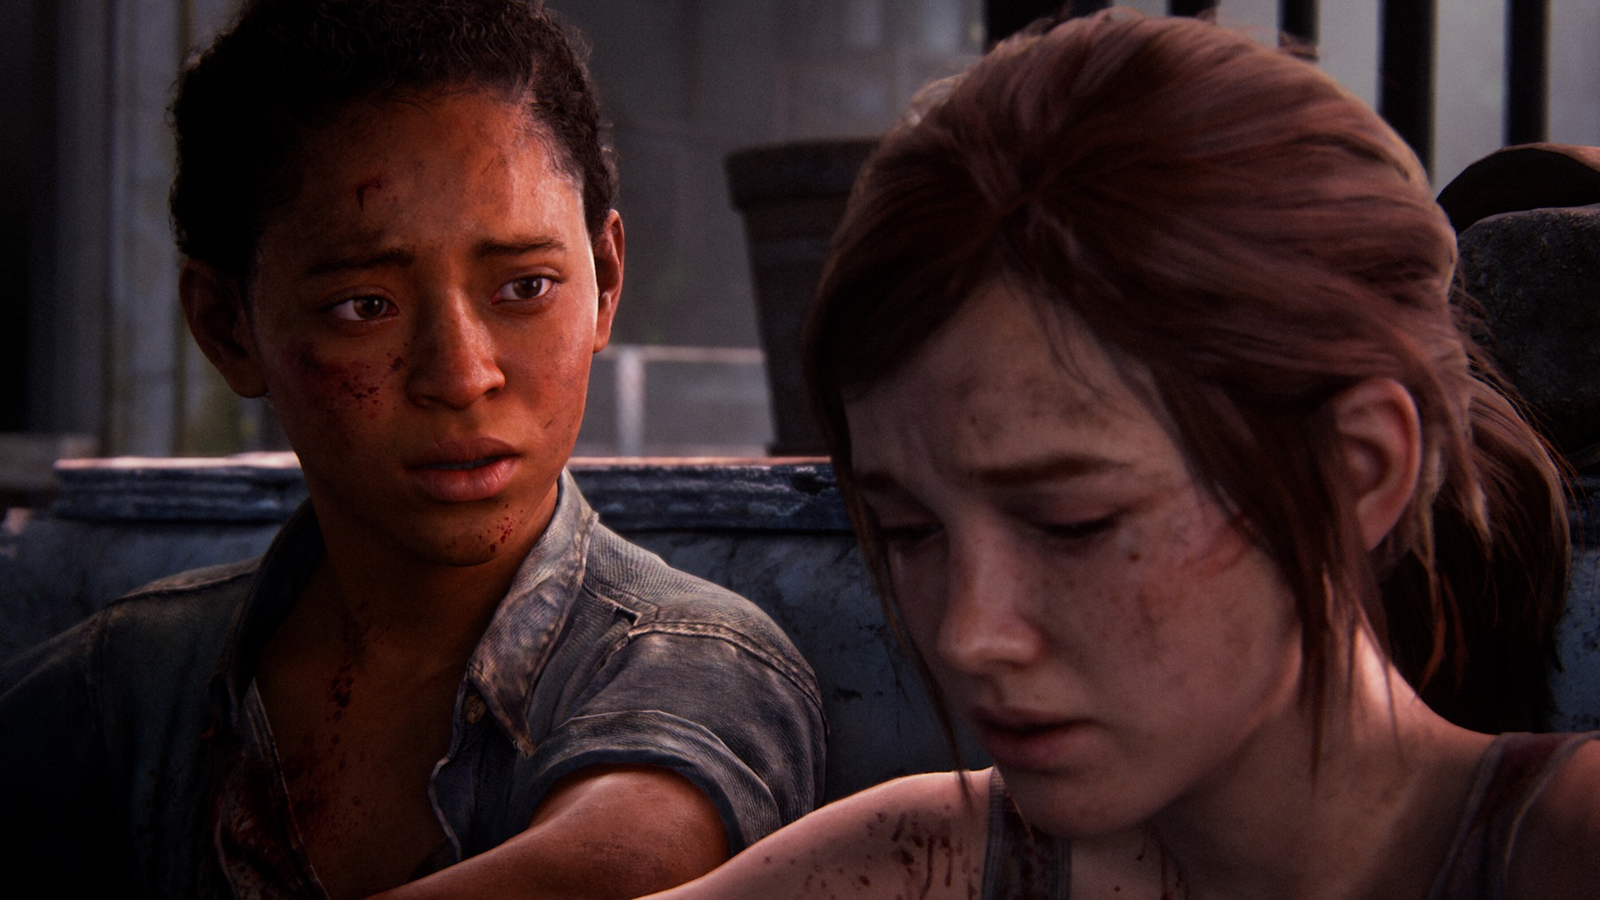 Naughty Dog Reveals The Last of Us Part I PC Features and Requirements - IGN